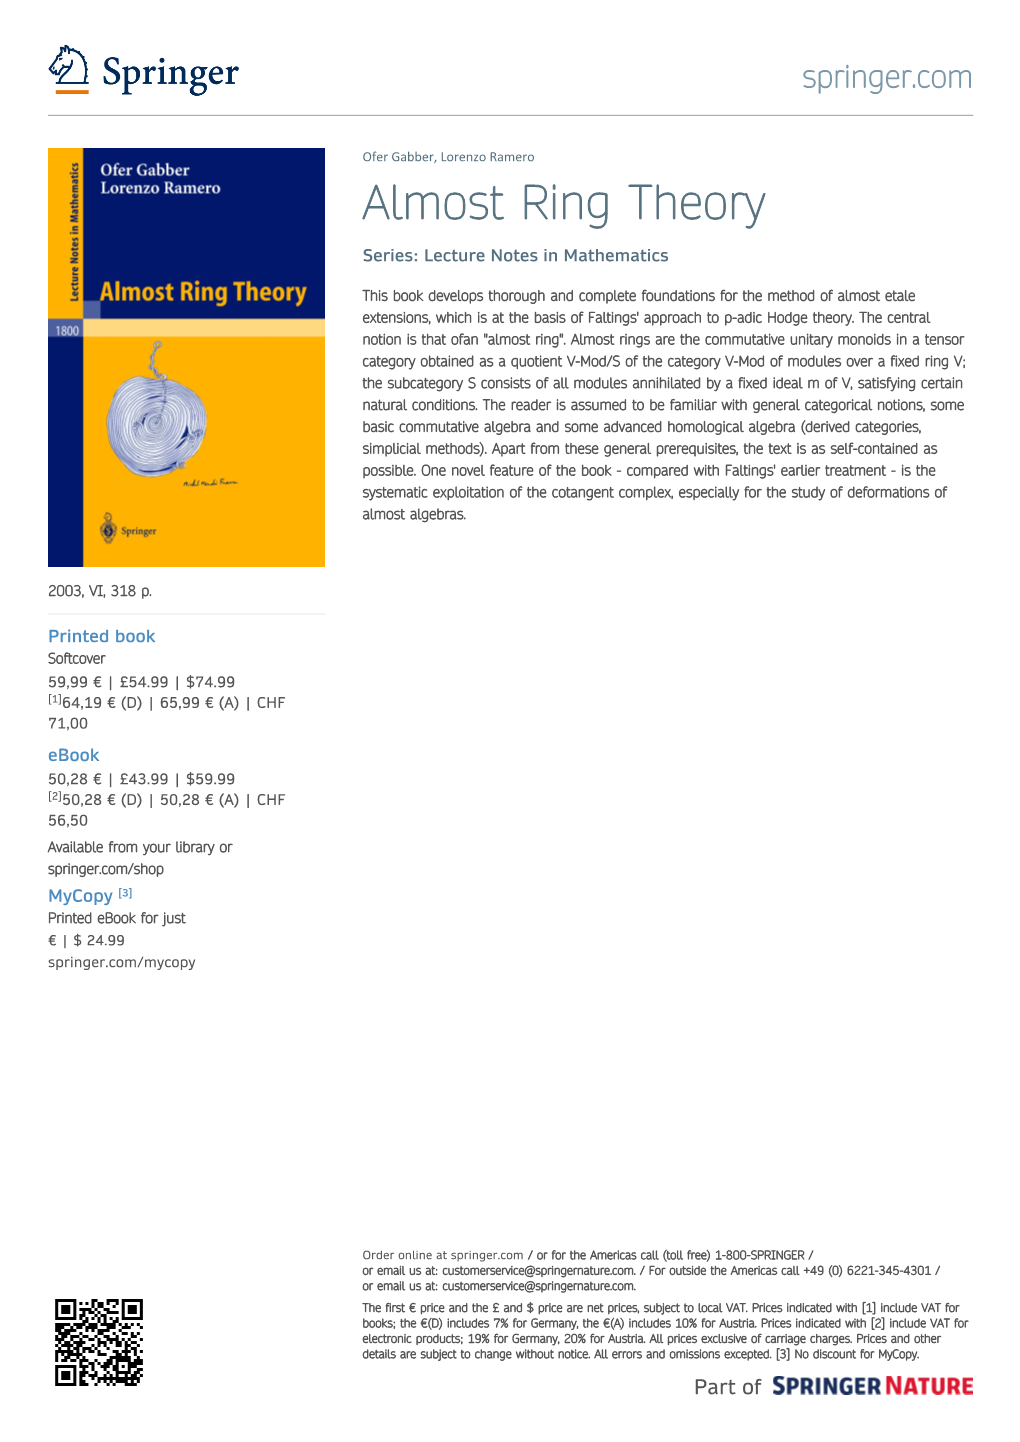 Almost Ring Theory Series: Lecture Notes in Mathematics